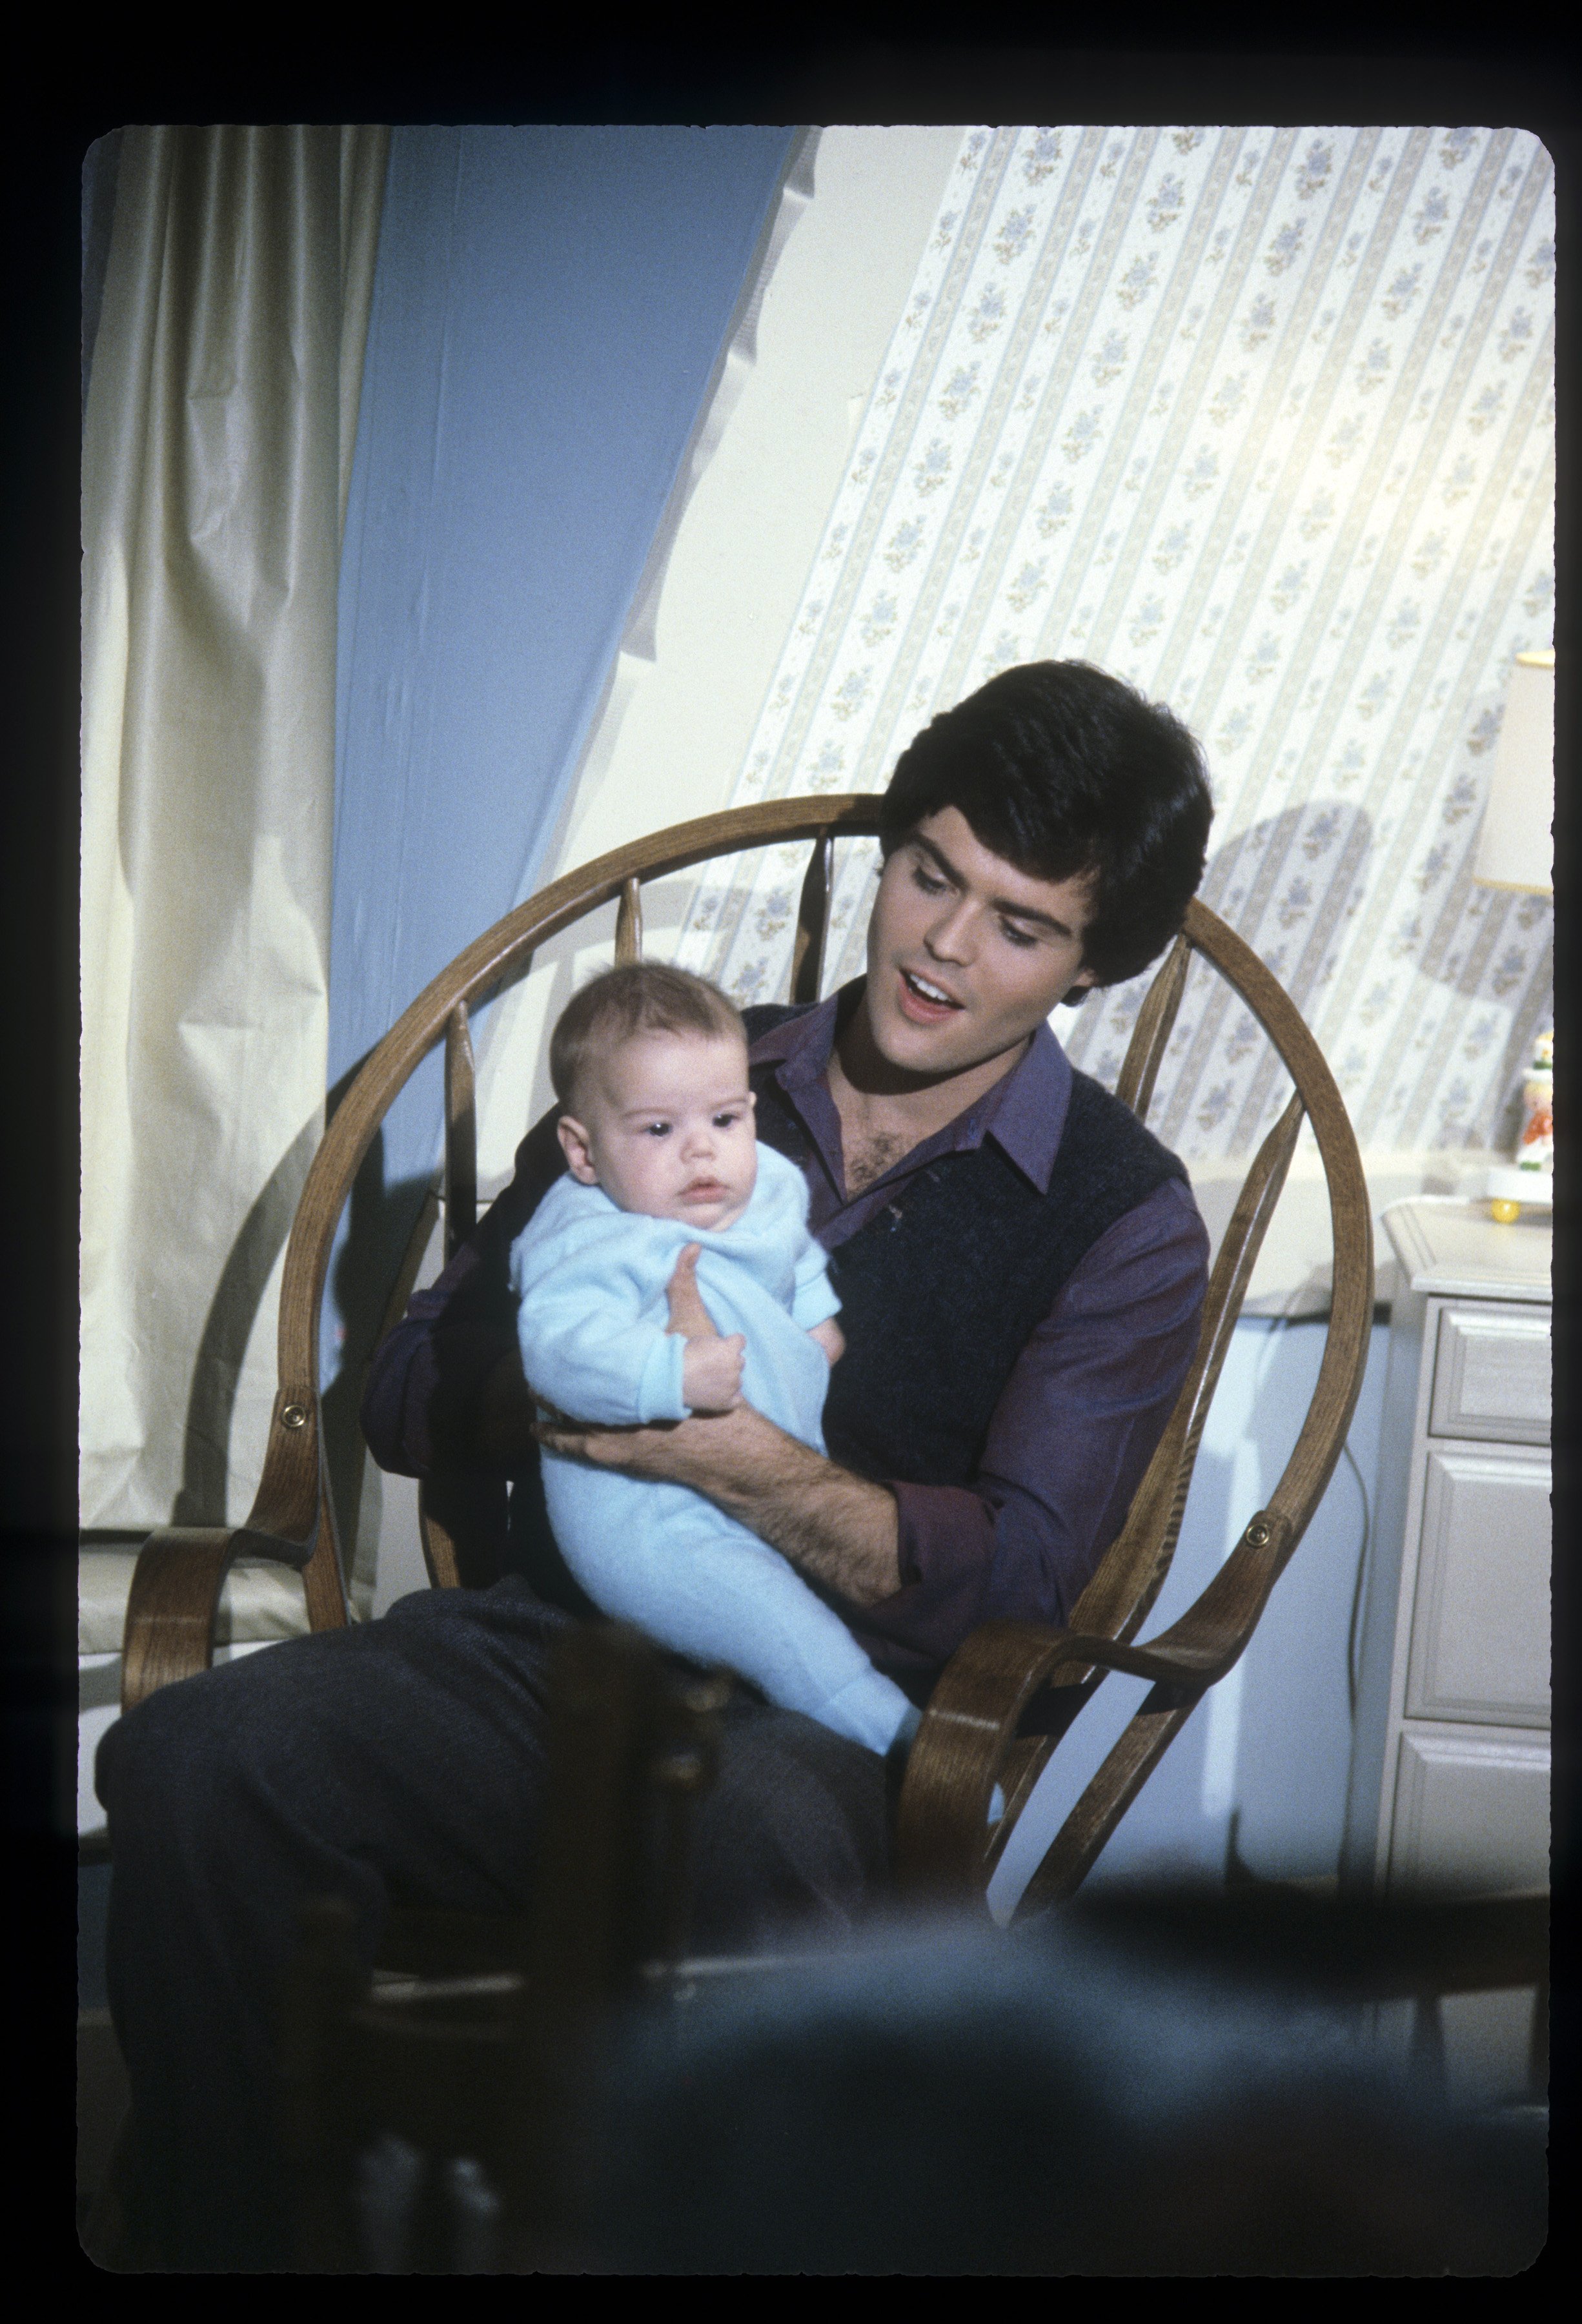 Television host Donny Osmond pictured with his first son, Donald Jr., Osmond on "The Donny and Marie Christmas Special" on December 14, 1979. | Source: Getty Images